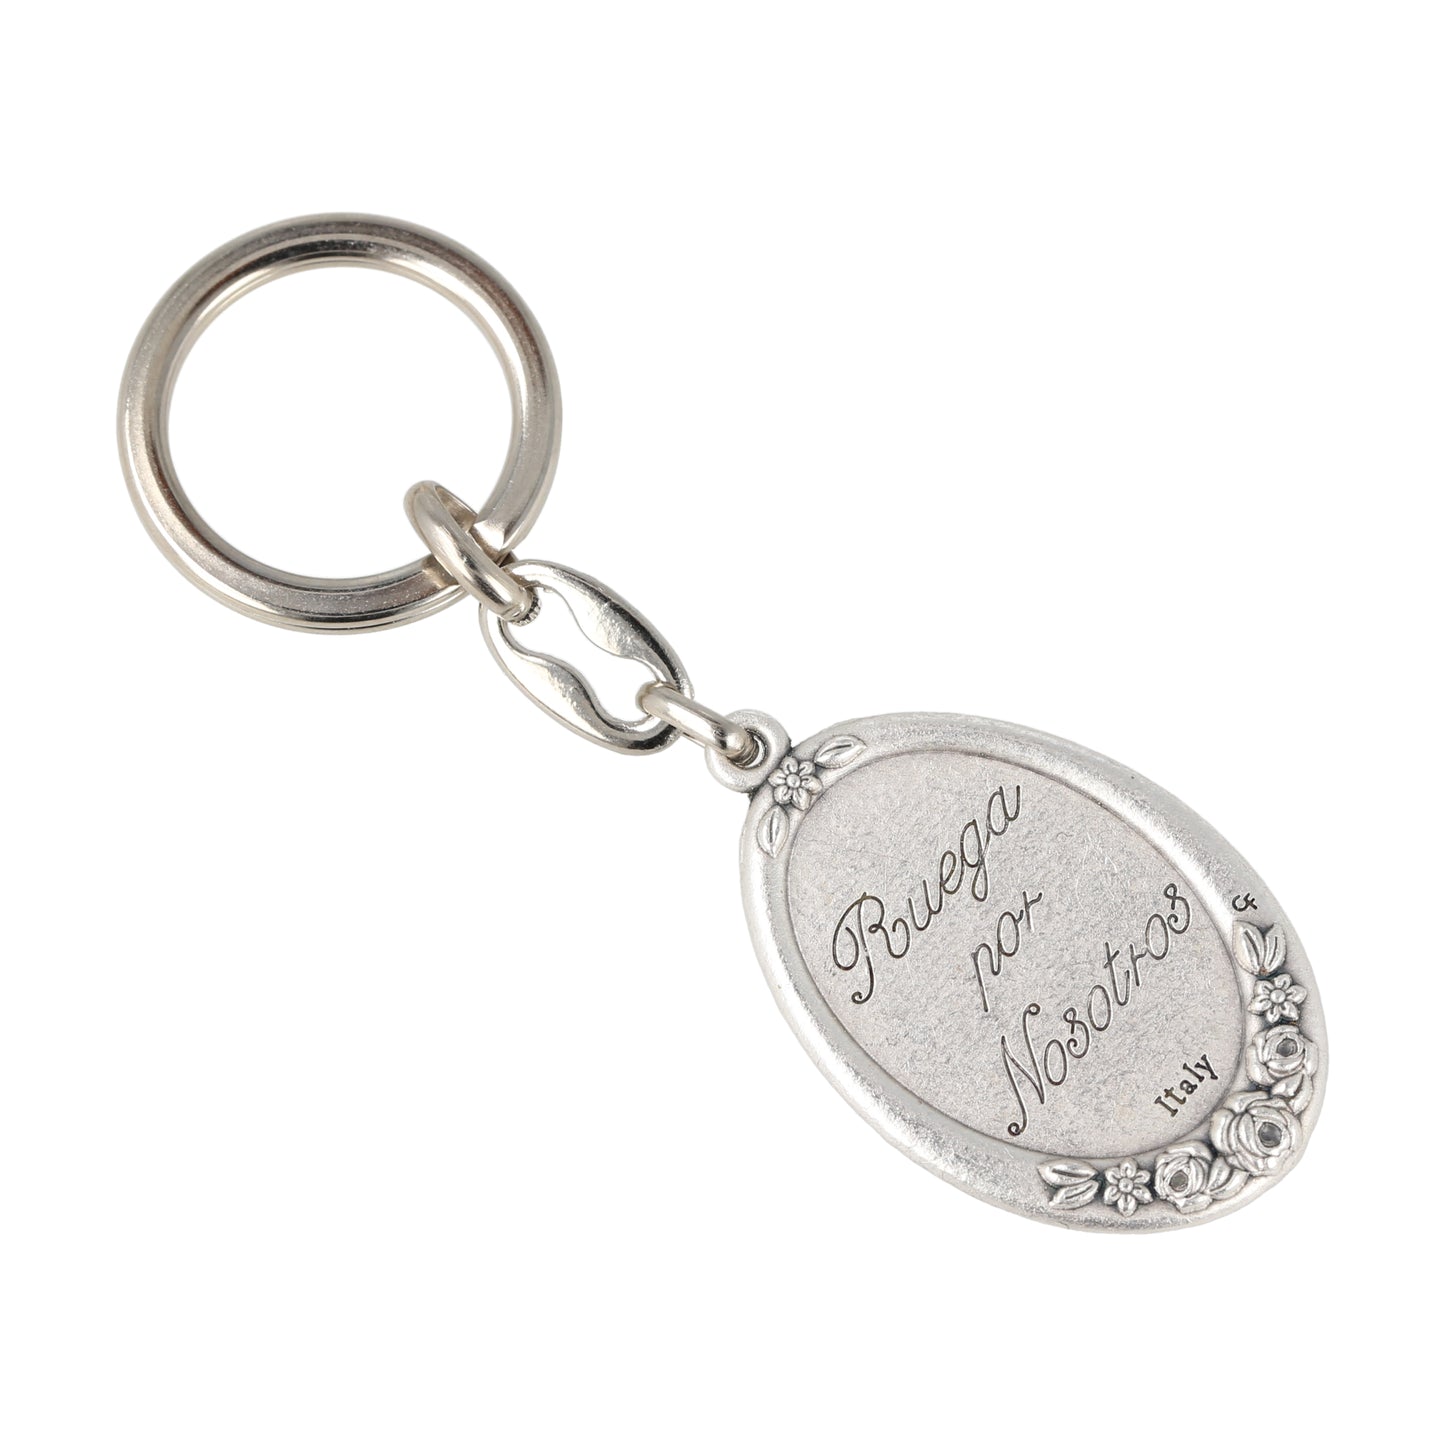 Keychain Divino Niño Silver Oval With Flowers. Souvenirs from Italy